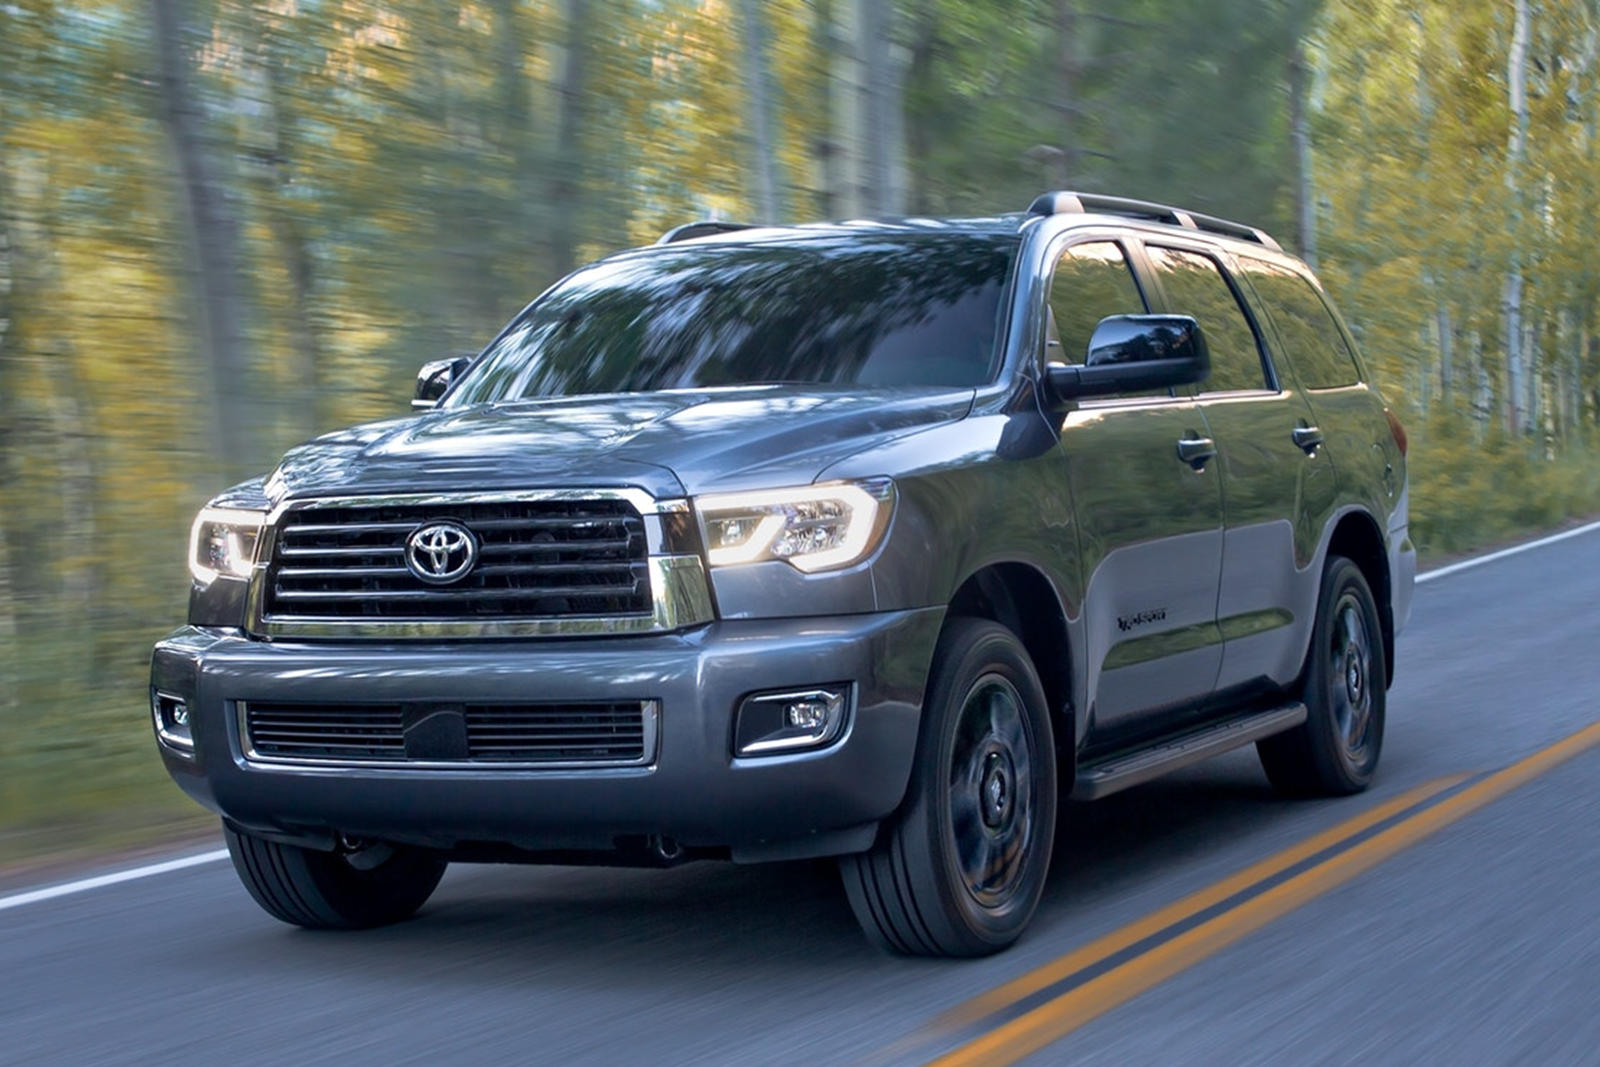 2019 Toyota Sequoia Front View Driving